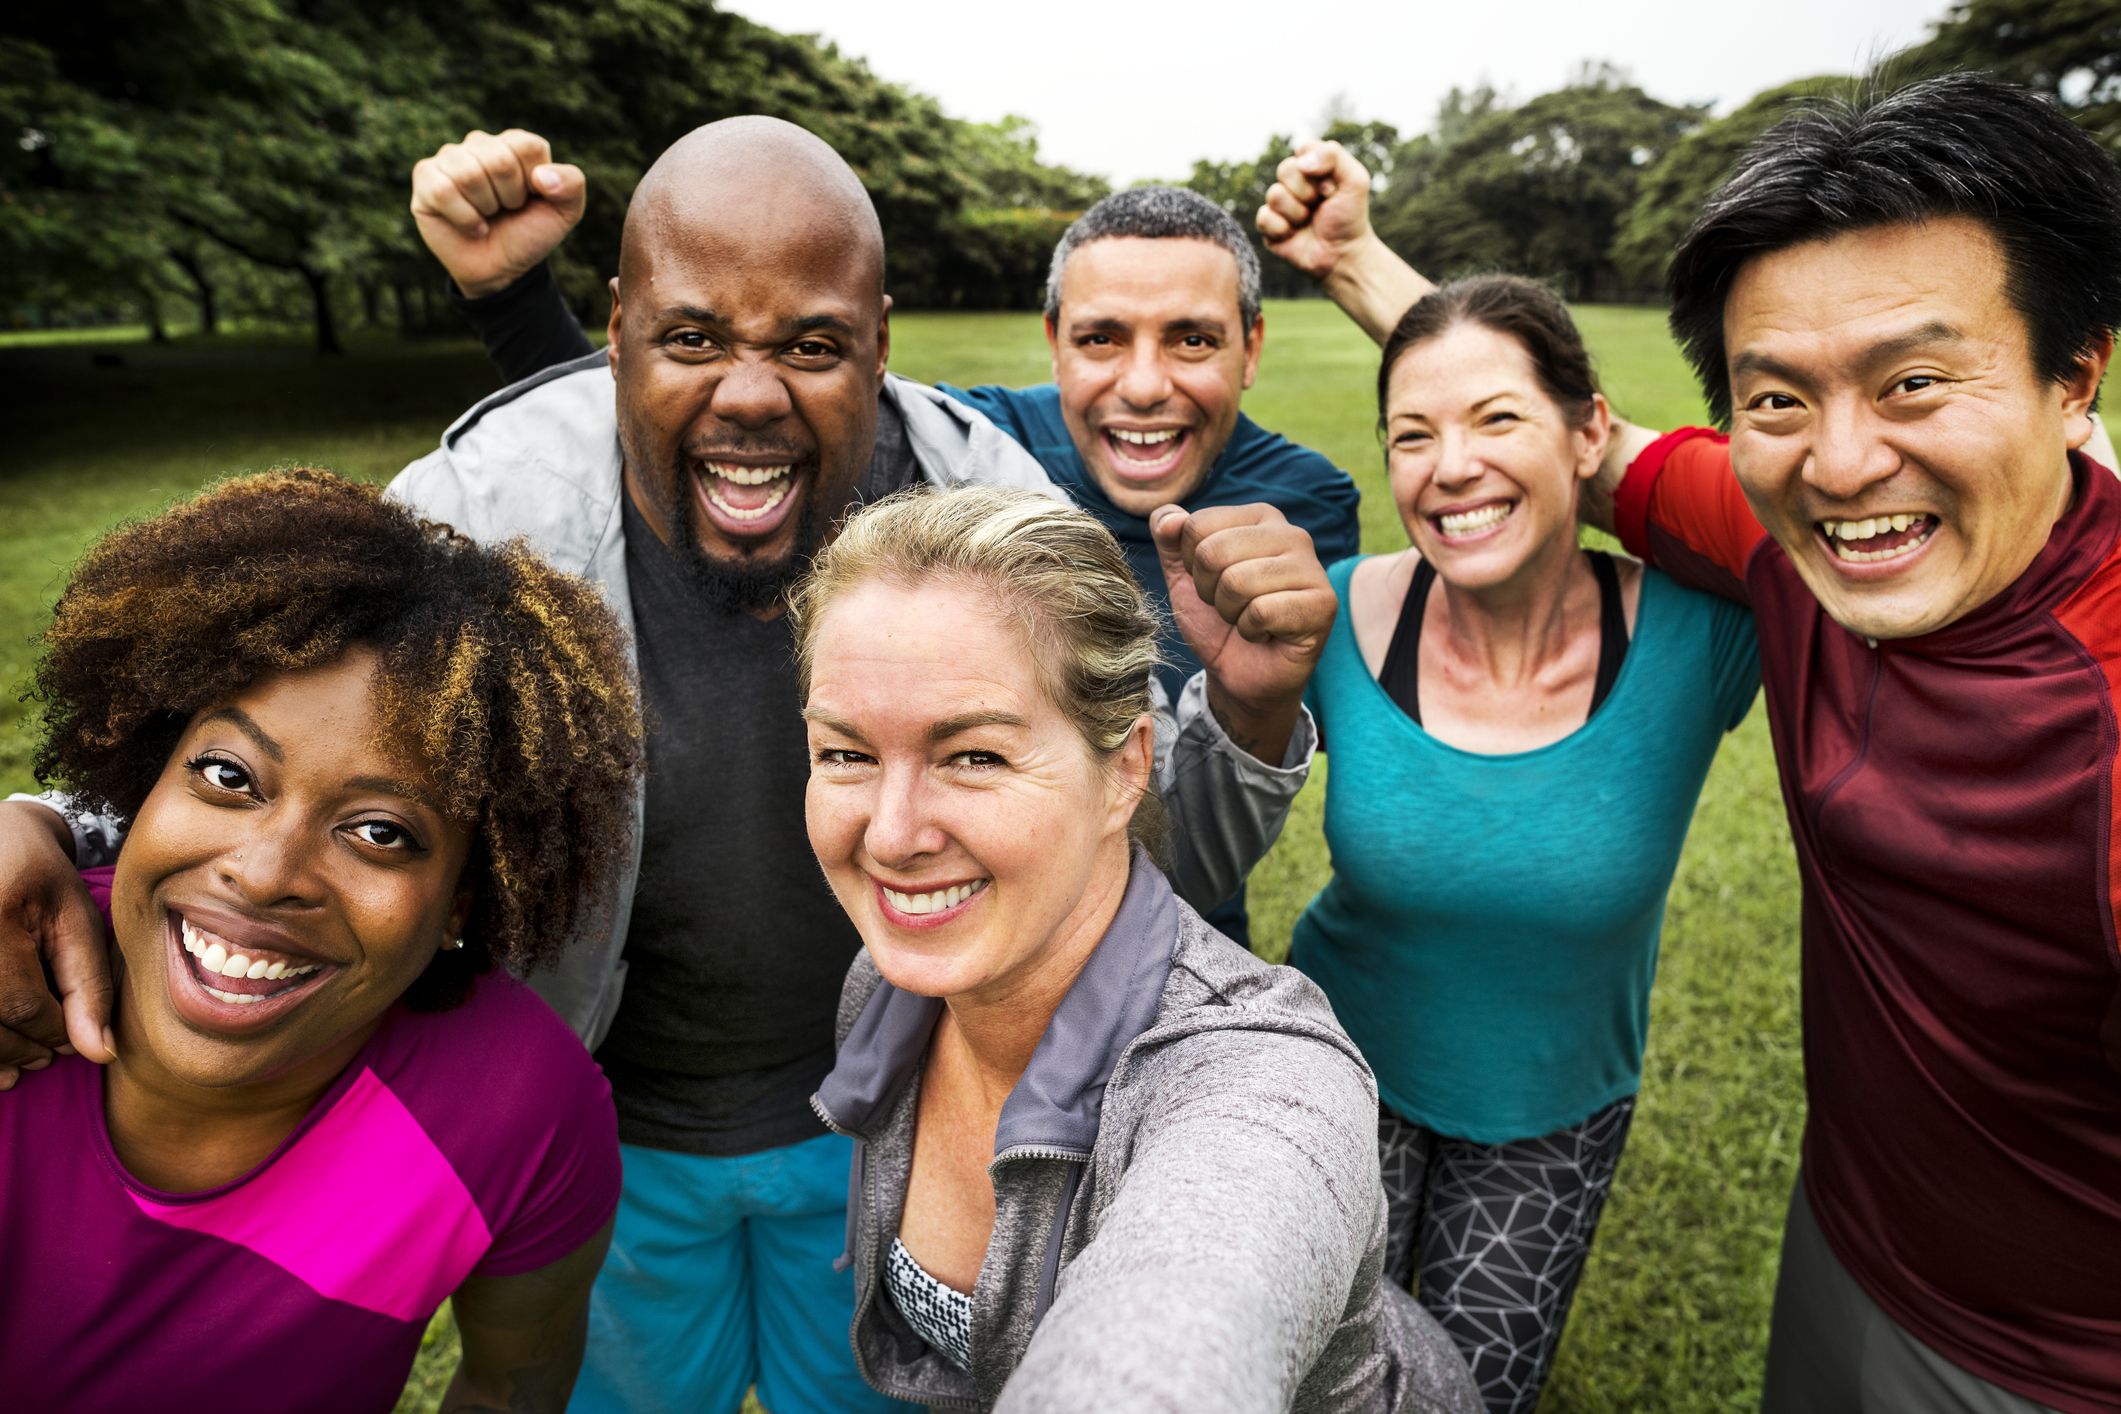 How to Motivate and Inspire Group Fitness Class Participants